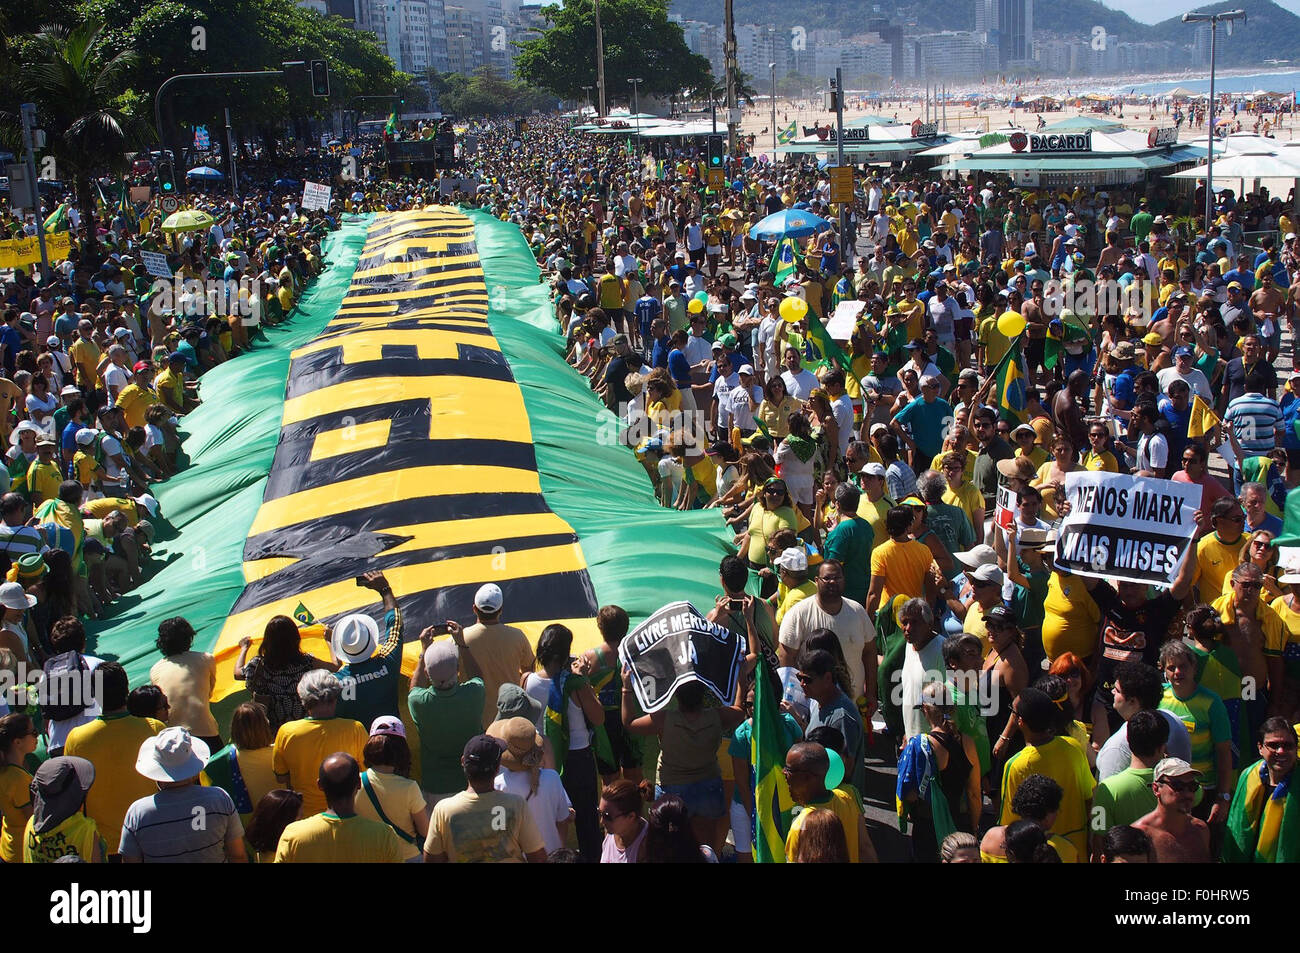 Rio De Janeiro, Brazil. 16th Aug, 2015. Demonstrators take part in a protest against the corruption scandal in Petrobras, growing economic hardship and in demand of the impeachment of Brazil's President Dilma Rousseff, in Rio de Janeiro, Brazil, on Aug. 16, 2015. According to local press, the anti-government protest were carried out at least in 200 cities around the country. © Heriberto Araujo/NOTIMEX/Xinhua/Alamy Live News Stock Photo